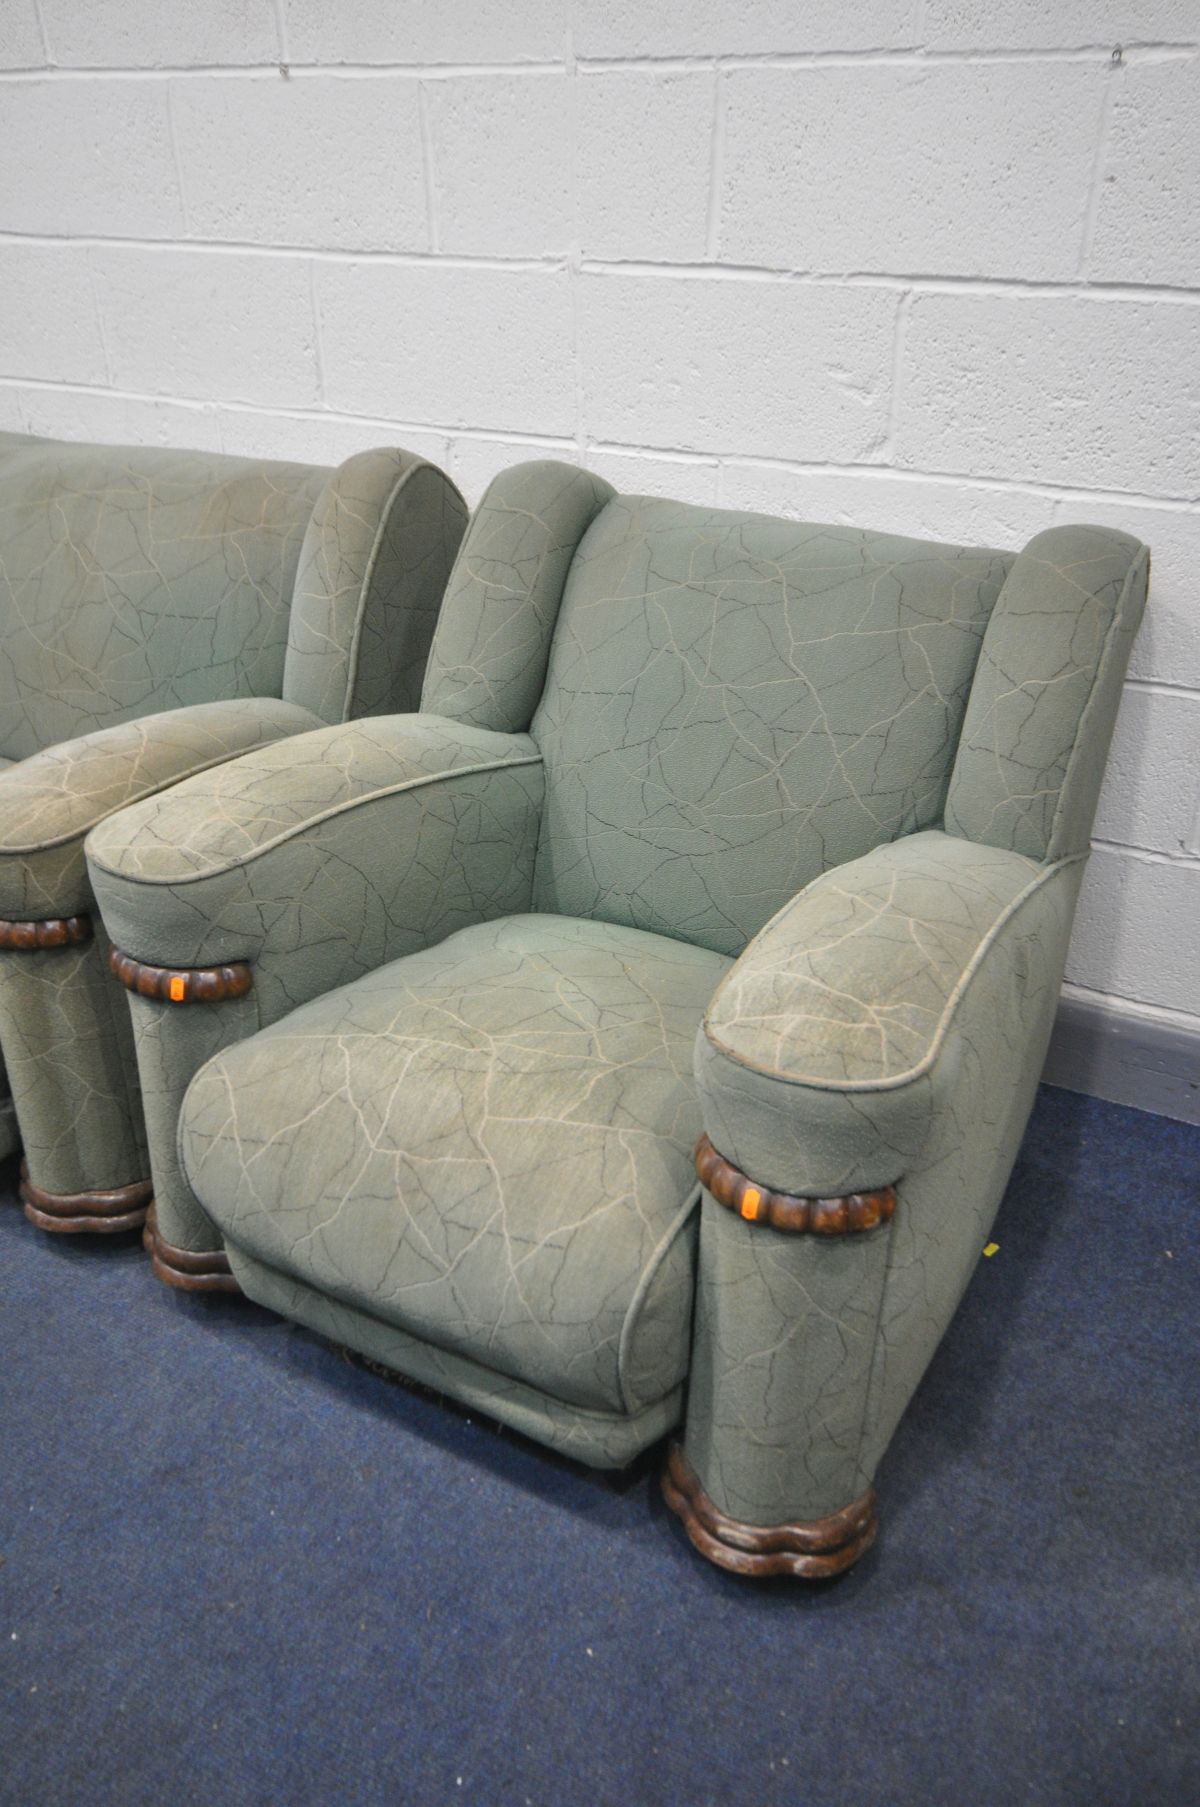 AN ART DECO THREE PIECE LOUNGE SUITE, with its original veined effect green upholstery, comprising a - Image 2 of 2